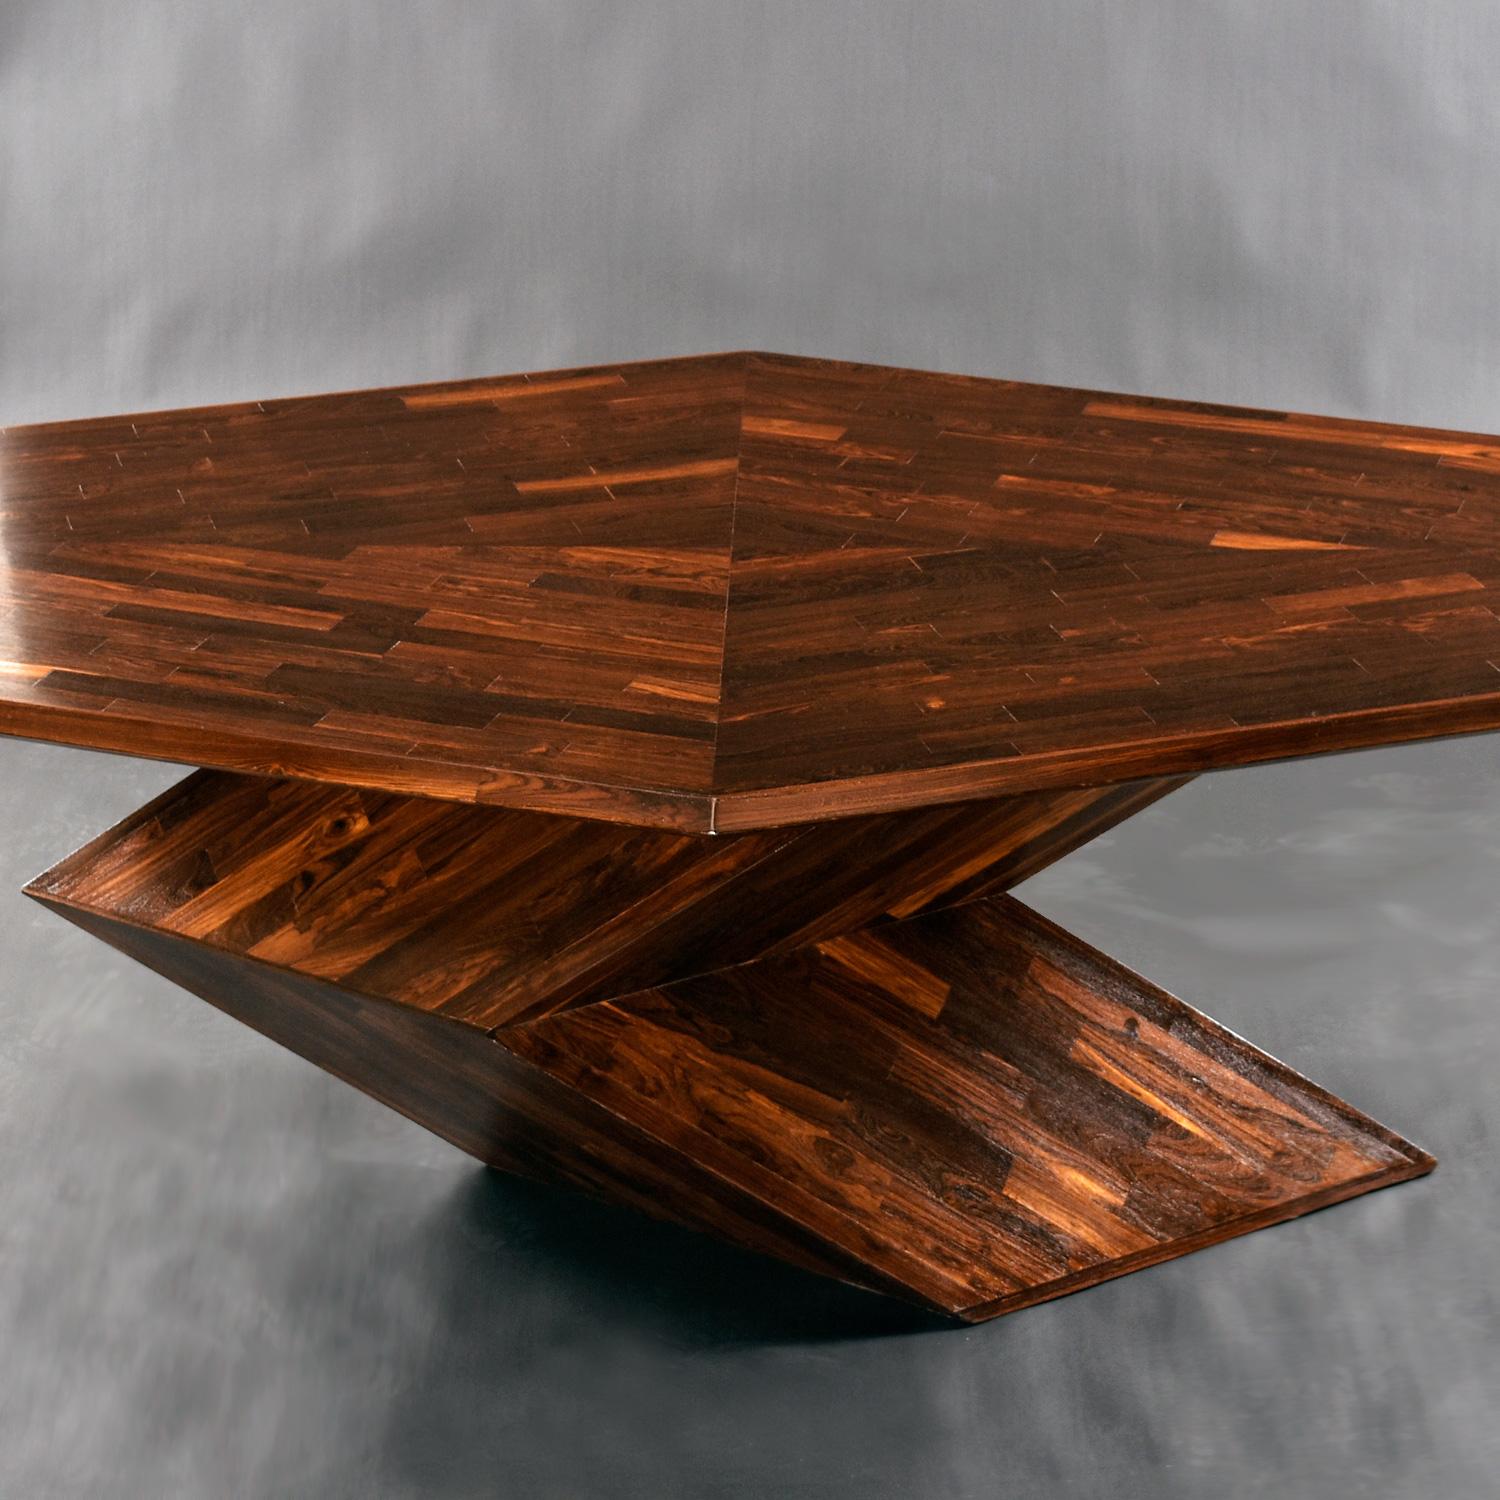 Mid-Century Modern Cocobolo Rosewood Dining Table by Don S. Shoemaker for Señal S.A. of Mexico For Sale